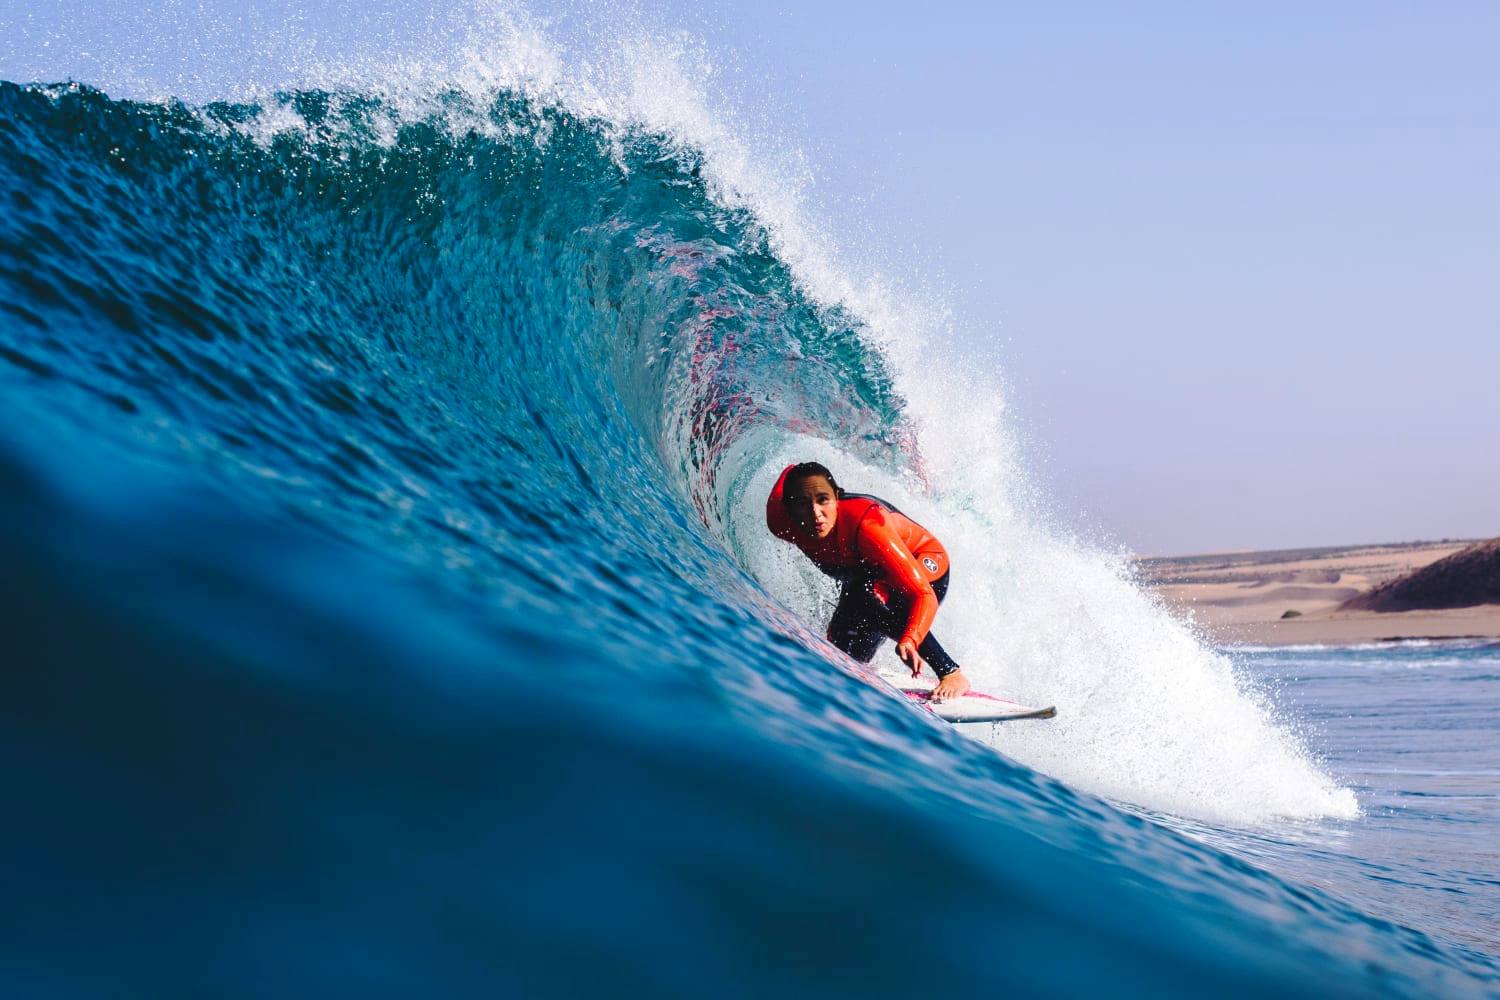 Morocco surfing holidays in Dakhla beach South of Morocco to enjoy the waves